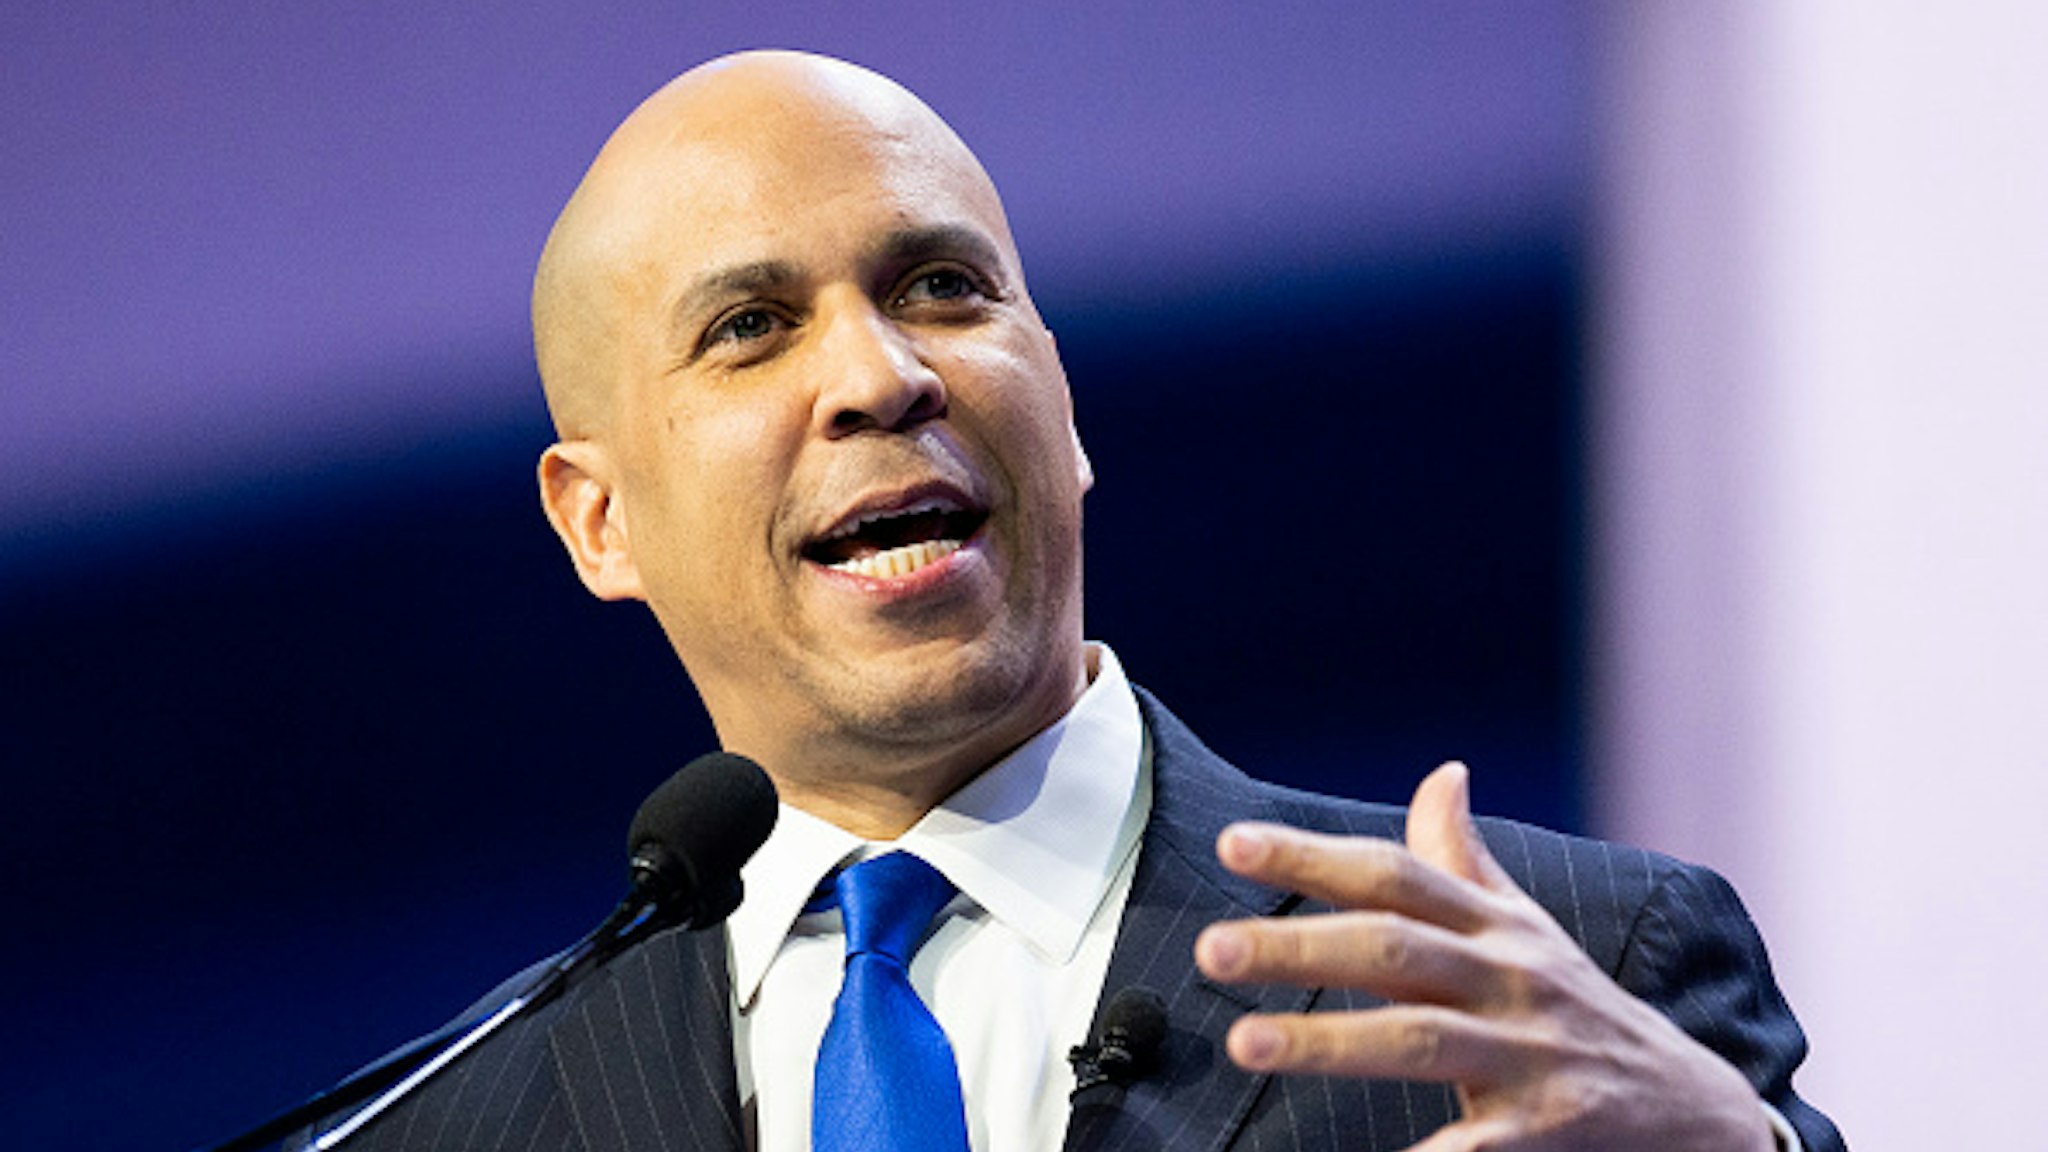 WASHINGTON, UNITED STATES - MARCH 02, 2020: U.S. Senator Cory Booker (D-NJ) speaks at the American Israel Public Affairs Committee Policy Conference.- PHOTOGRAPH BY Michael Brochstein / Echoes Wire/ Barcroft Studios / Future Publishing